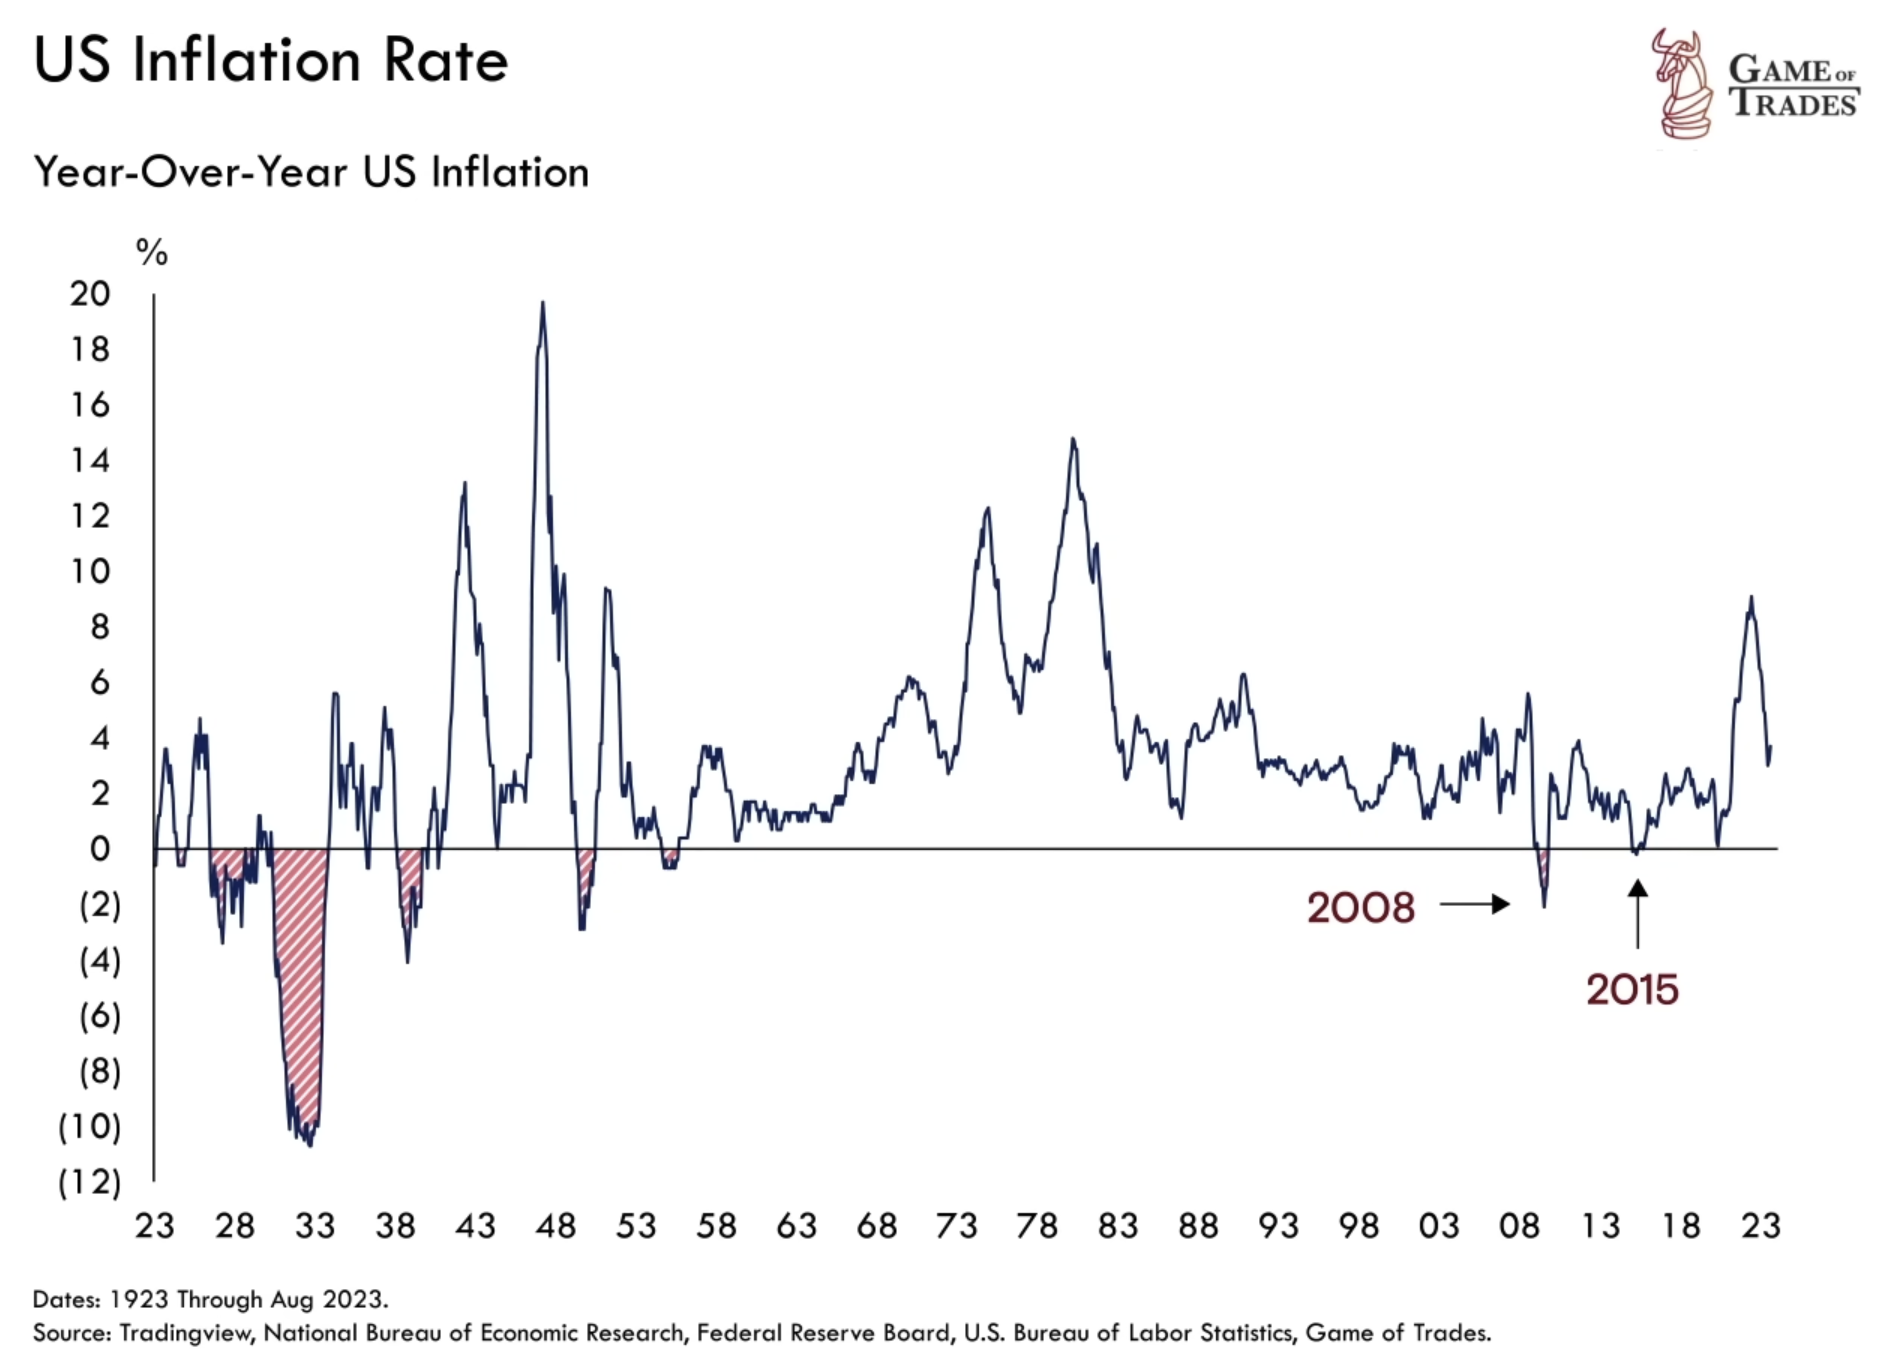 US Inflation rate 